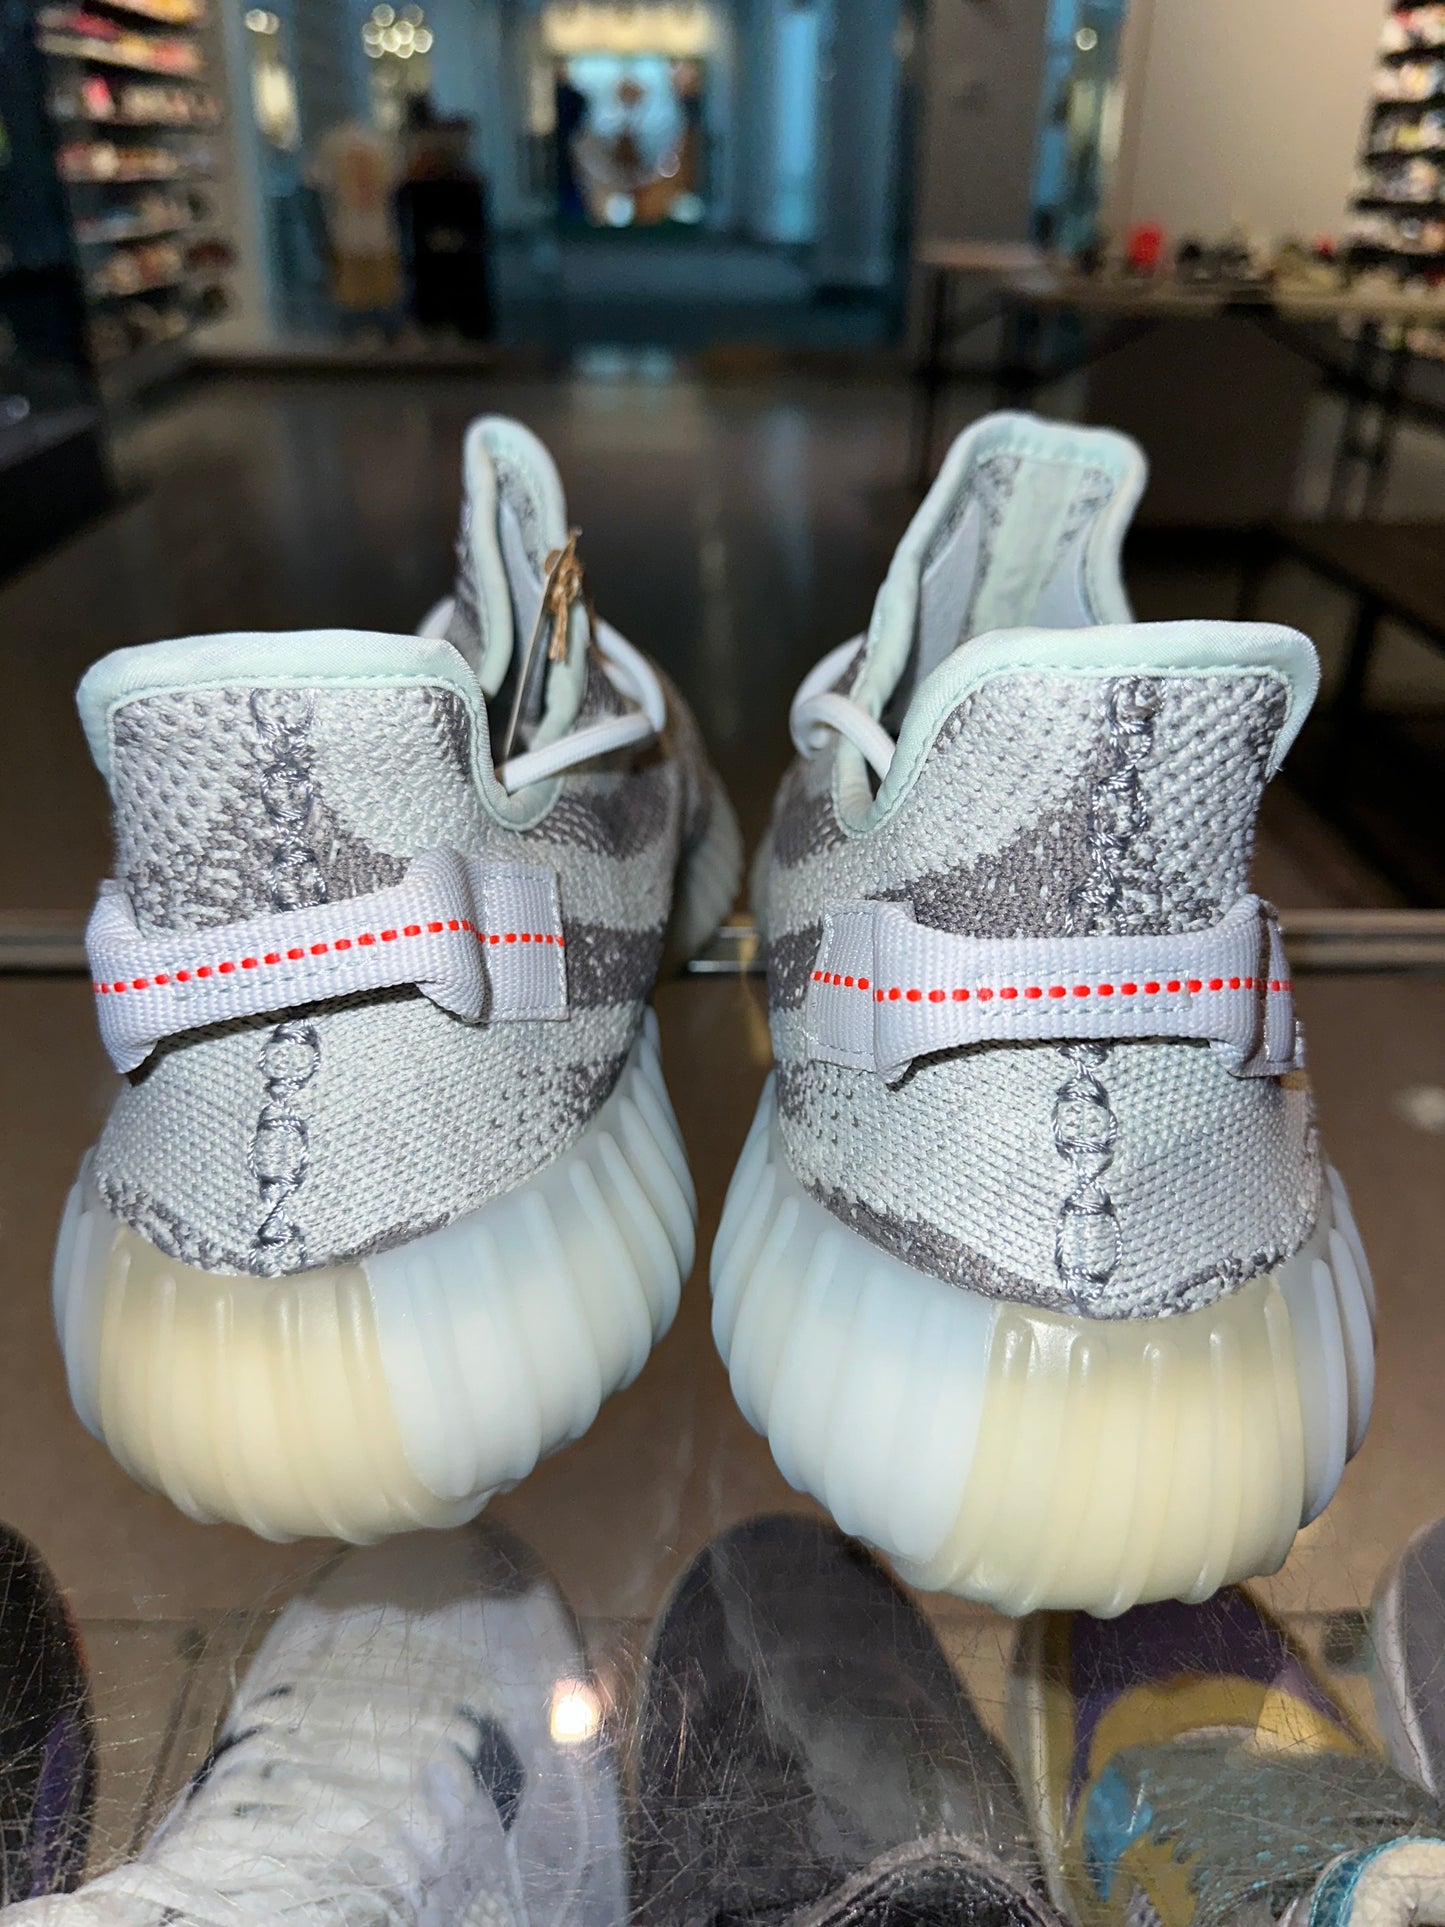 Size 12 Adidas Yeezy Boost 350 “Blue Tint” Brand New (Mall)